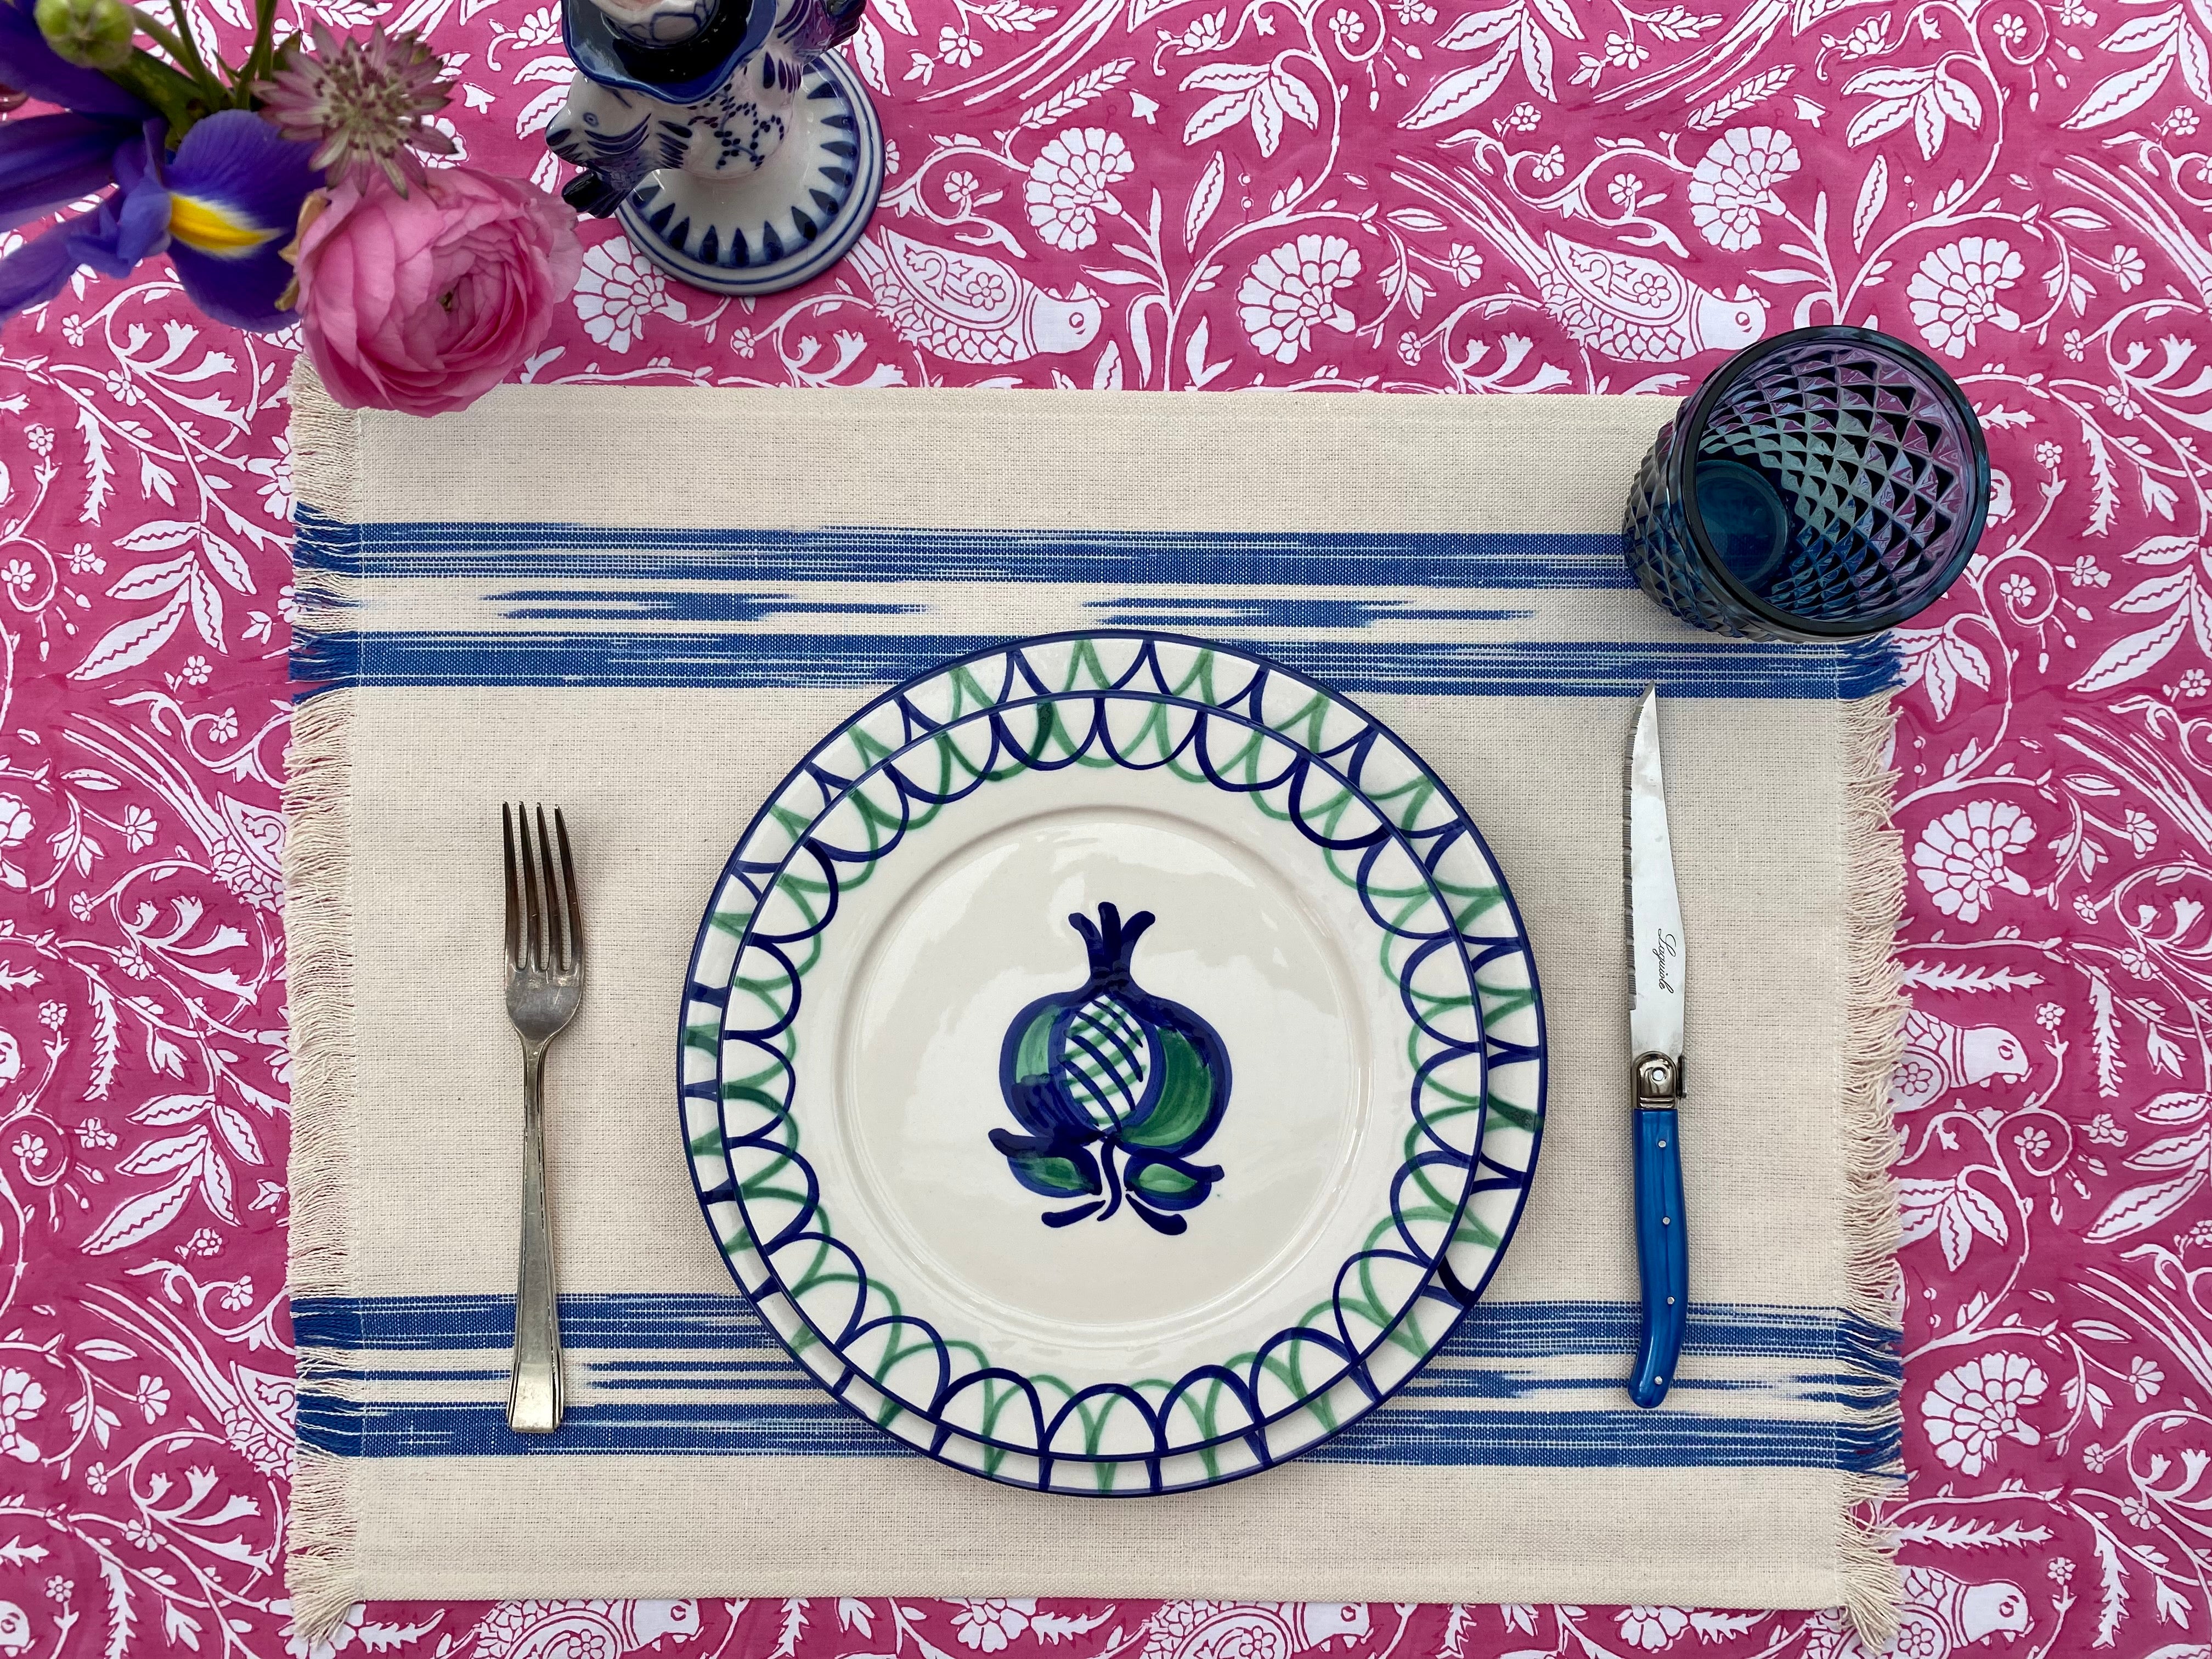 FABRIC PLACEMAT - CREAM WITH BLUE IKAT STRIPE